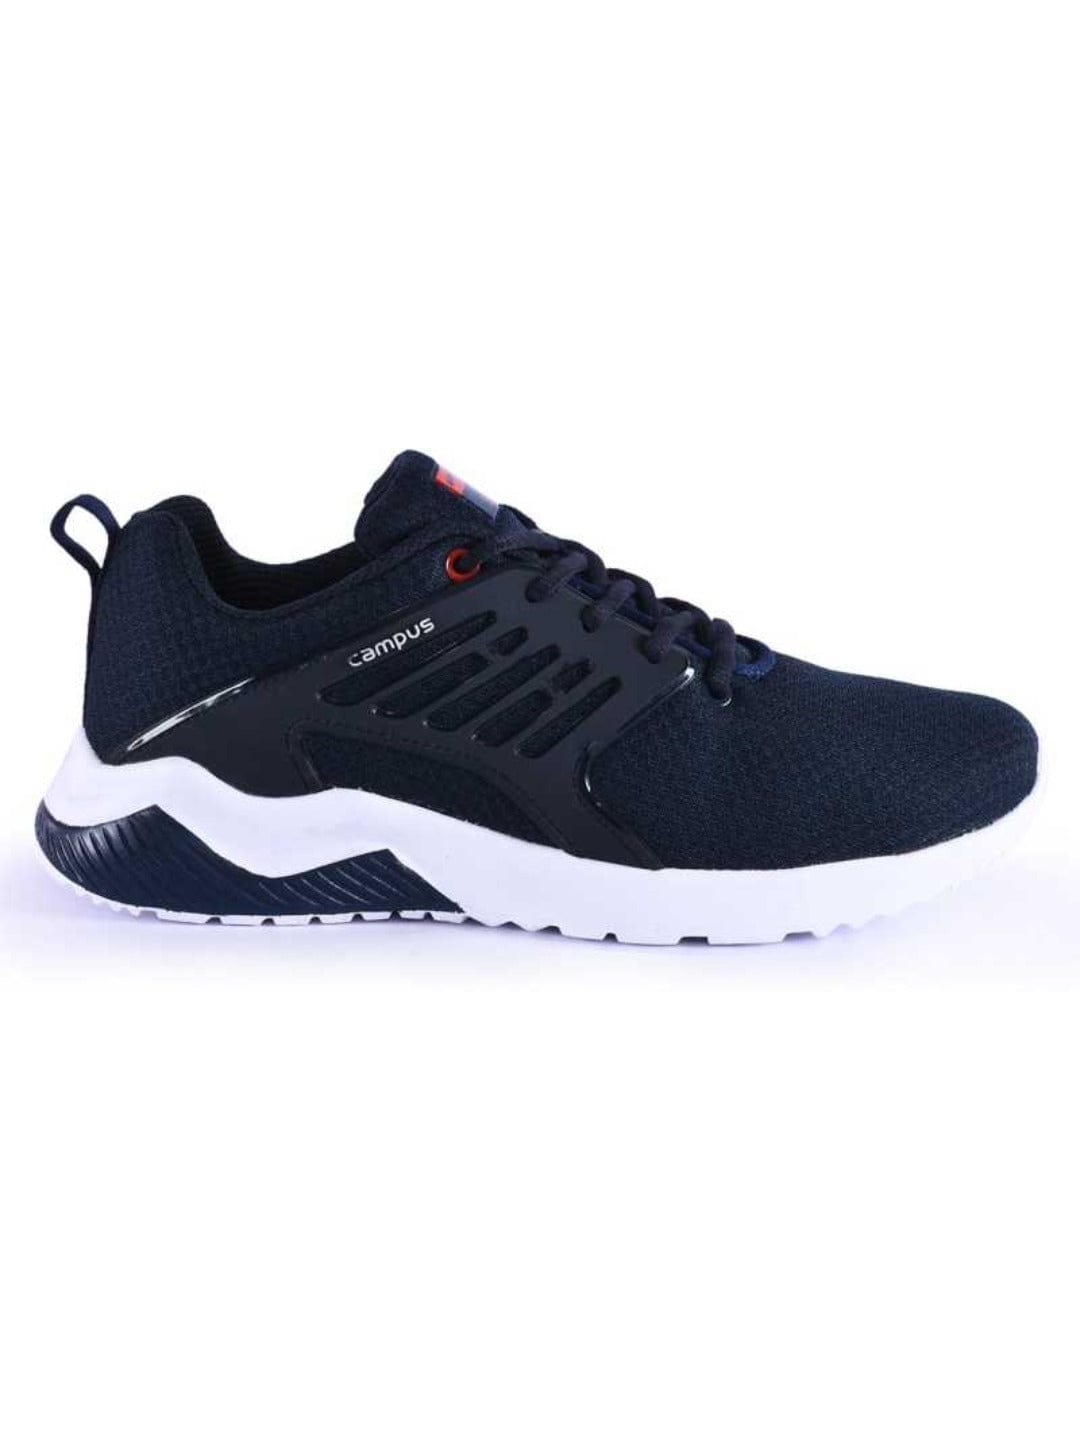 Buy CRYSTA Pro Blue Men's Running Shoes online | Campus Shoes